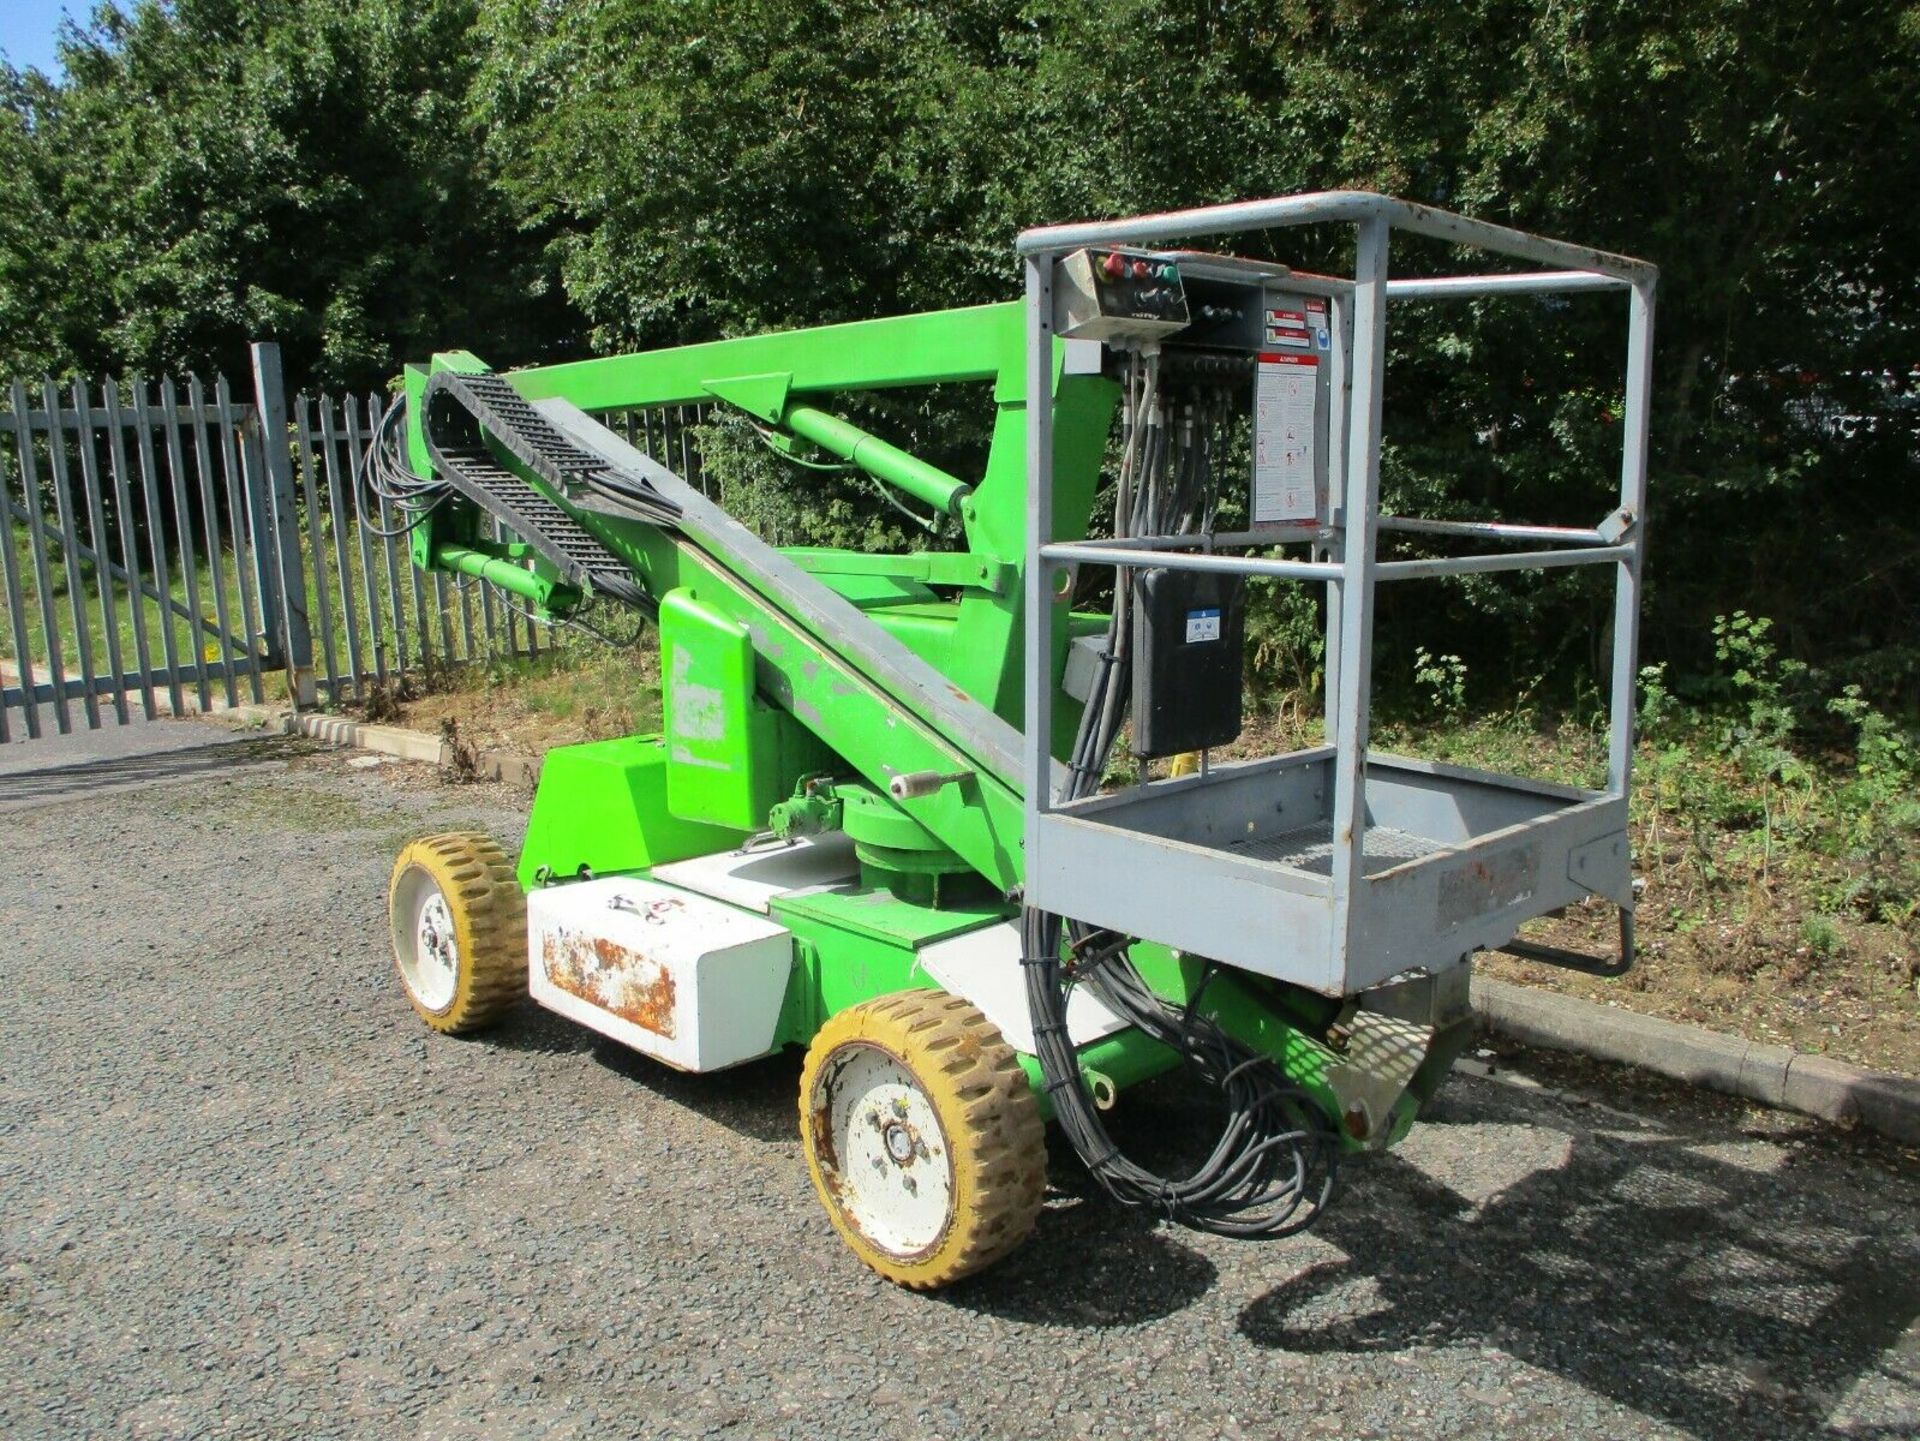 Nifty Lift HR12 Self Propelled Access Platform 2007 - Image 5 of 12